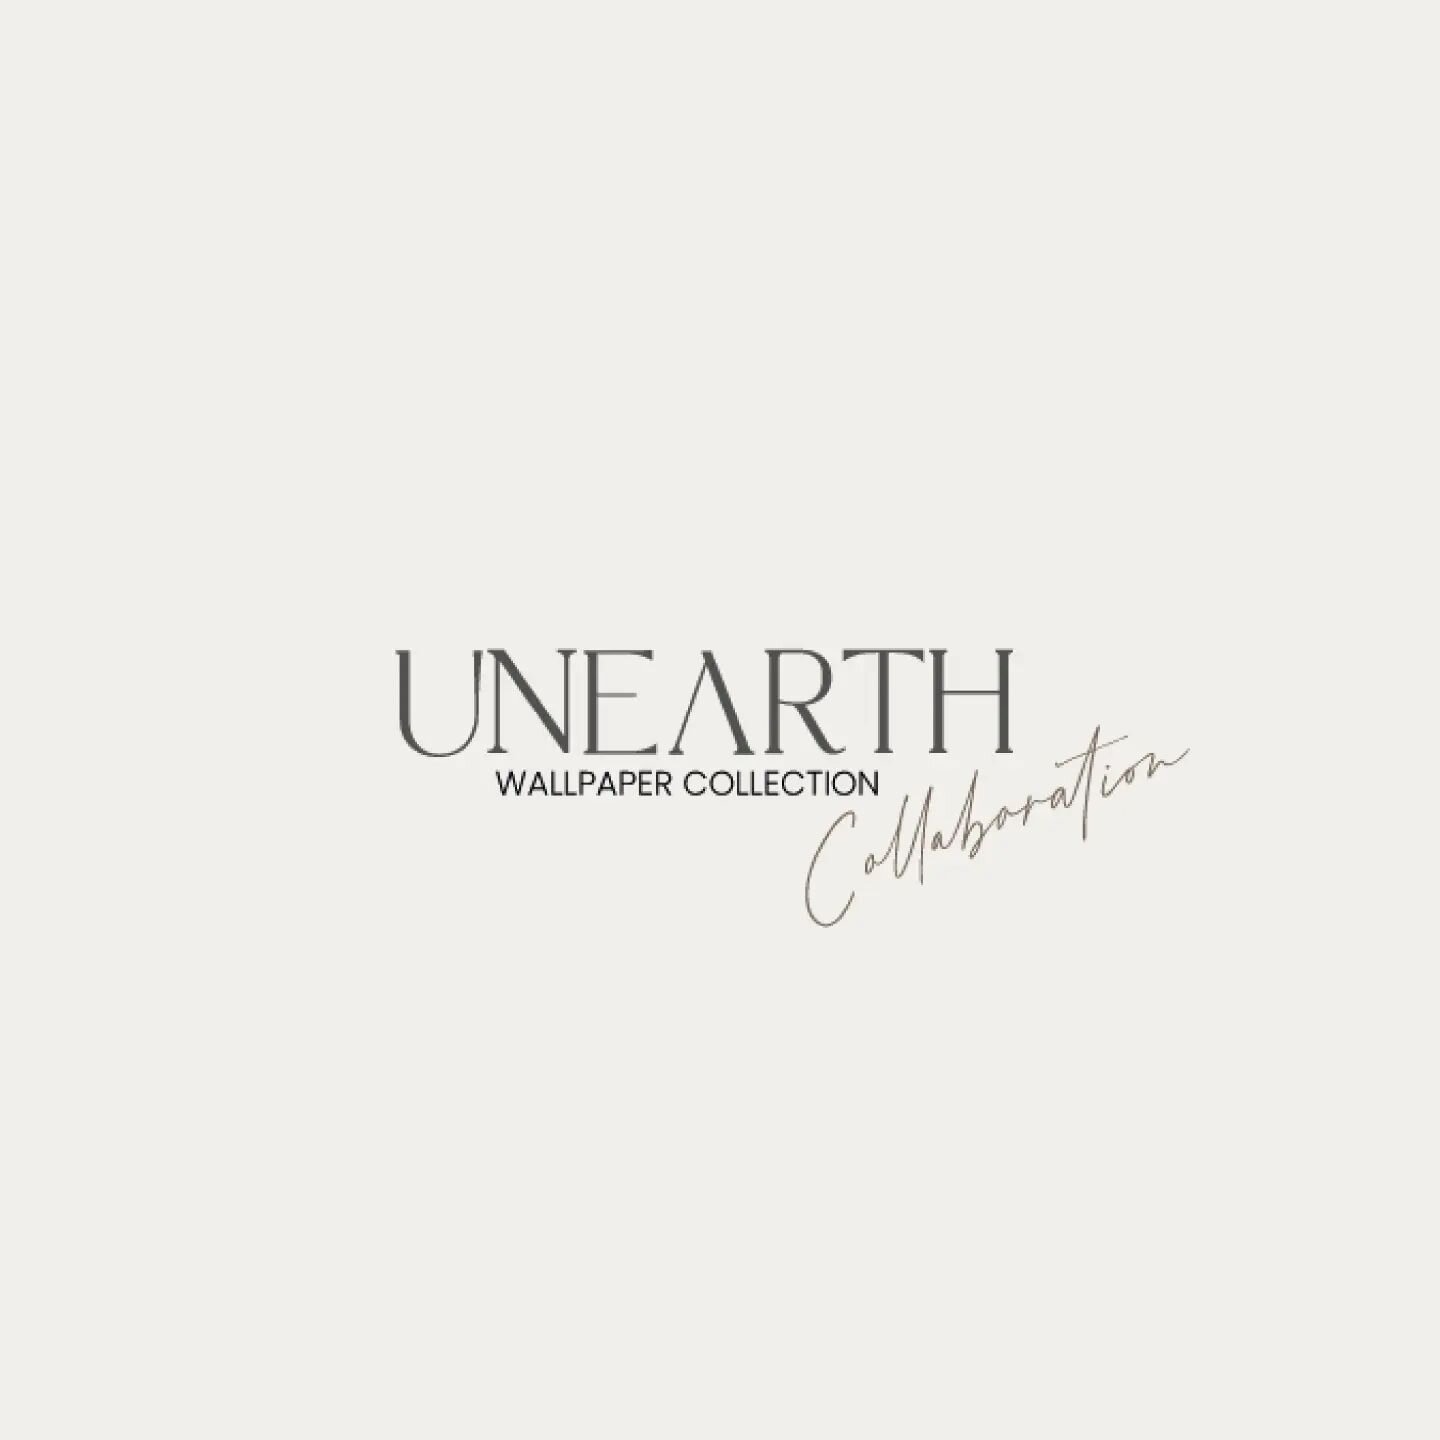 The 'Unearth' Wallpaper Collection Collaboration with Mitchell Black - Launching 13th September 2023
.
A beautiful curated collection of understated yet timeless wallpaper inspired by African prints and patterns on a pallete of earthy and neutral ton